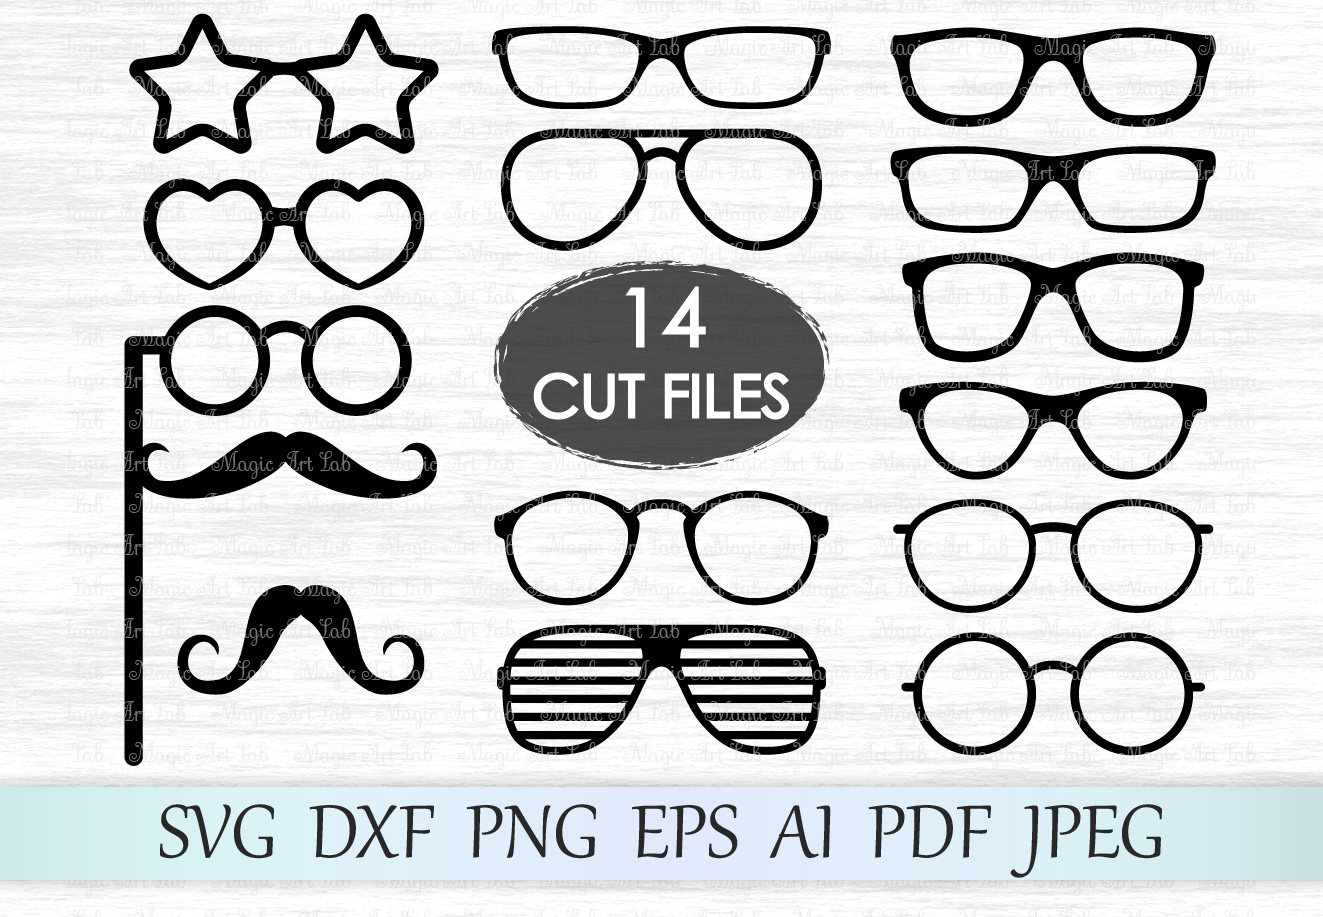 glasses clipart party